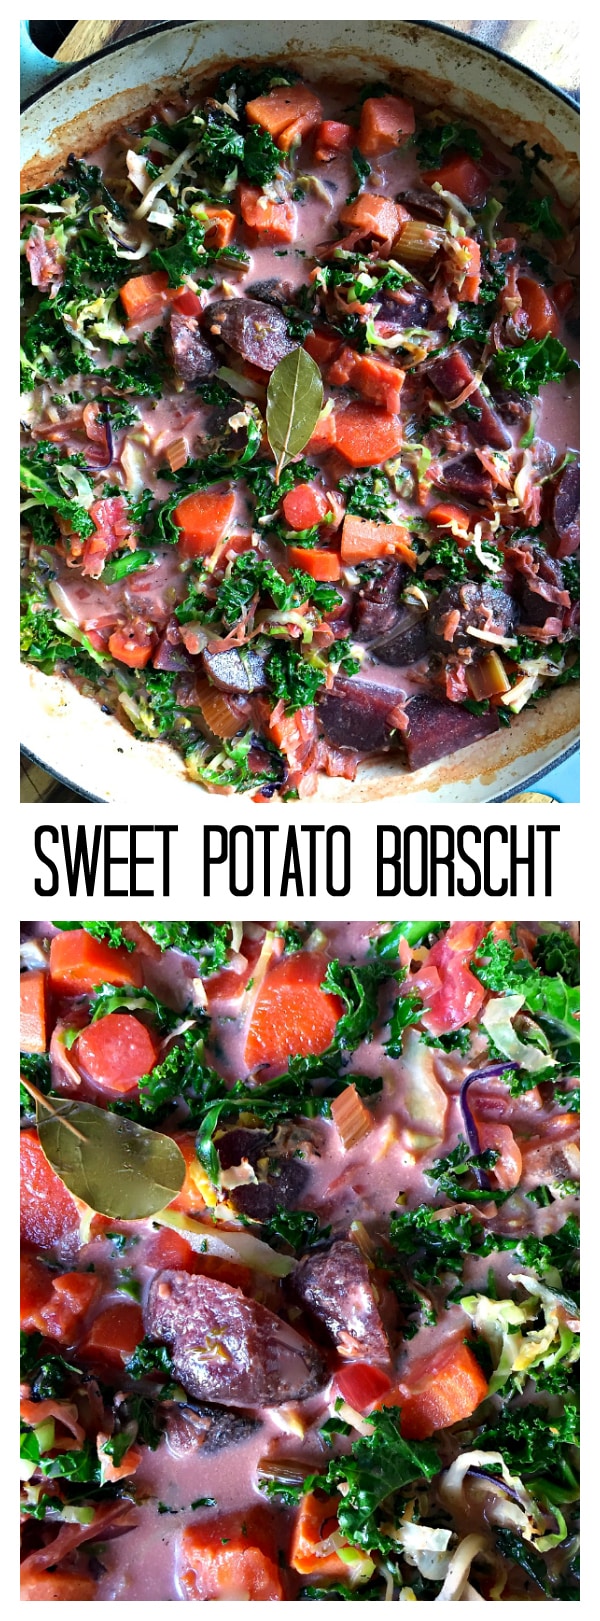 The deep flavor of root vegetables in this Sweet Potato Borscht, along with fresh dill, leaves the soup rustic and chunky, with a sweet, creamy broth, unclouded by starch that might be released by using white potatoes.